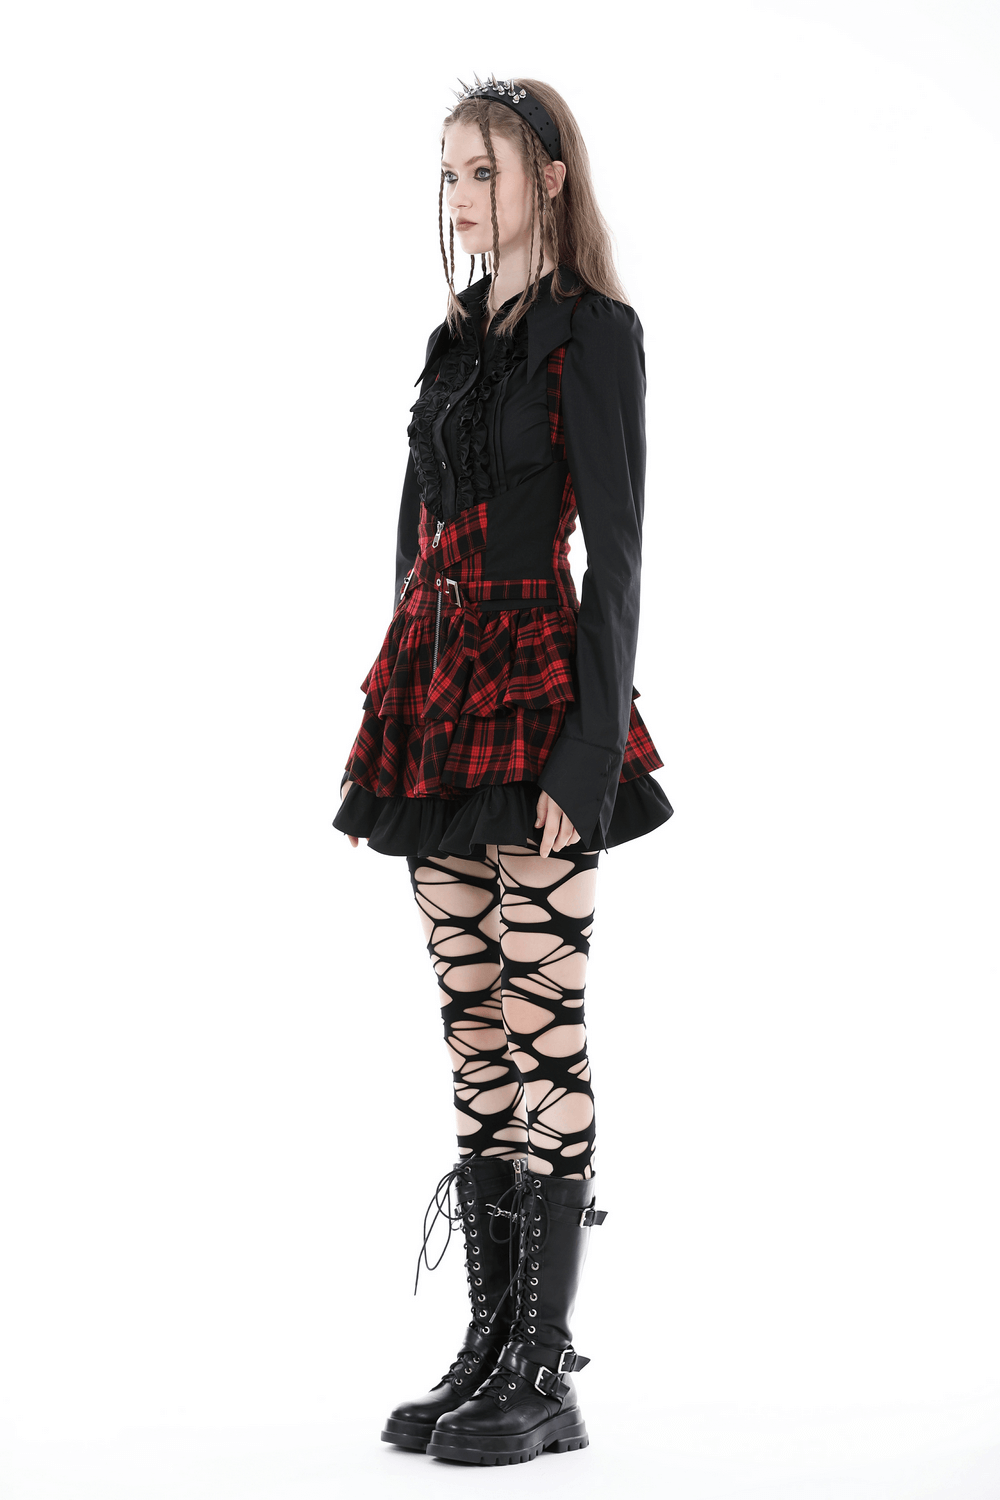 Black and Red Gothic Punk Rock Dress with Suspender Skirt